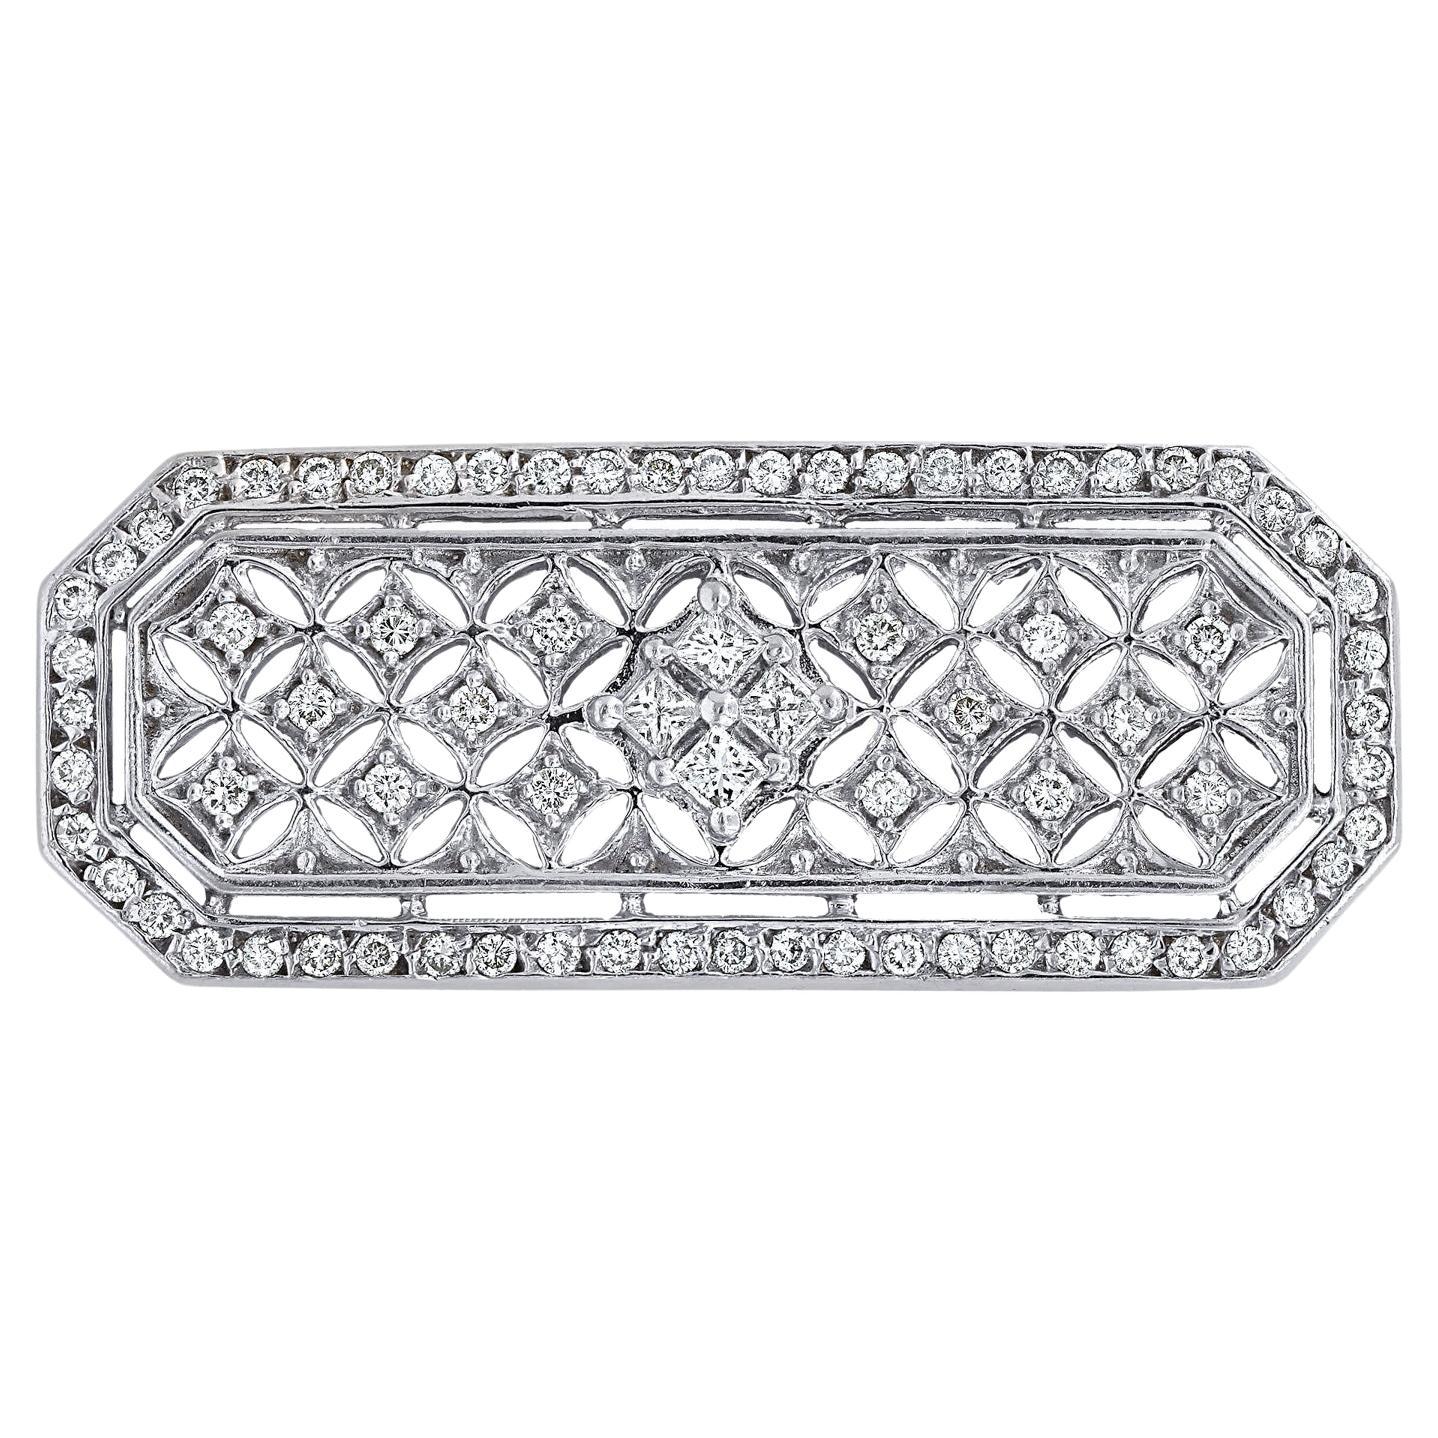 Diana M. Openwork 14 kt white gold diamond pin/brooch adorned with 1.60 cts  For Sale